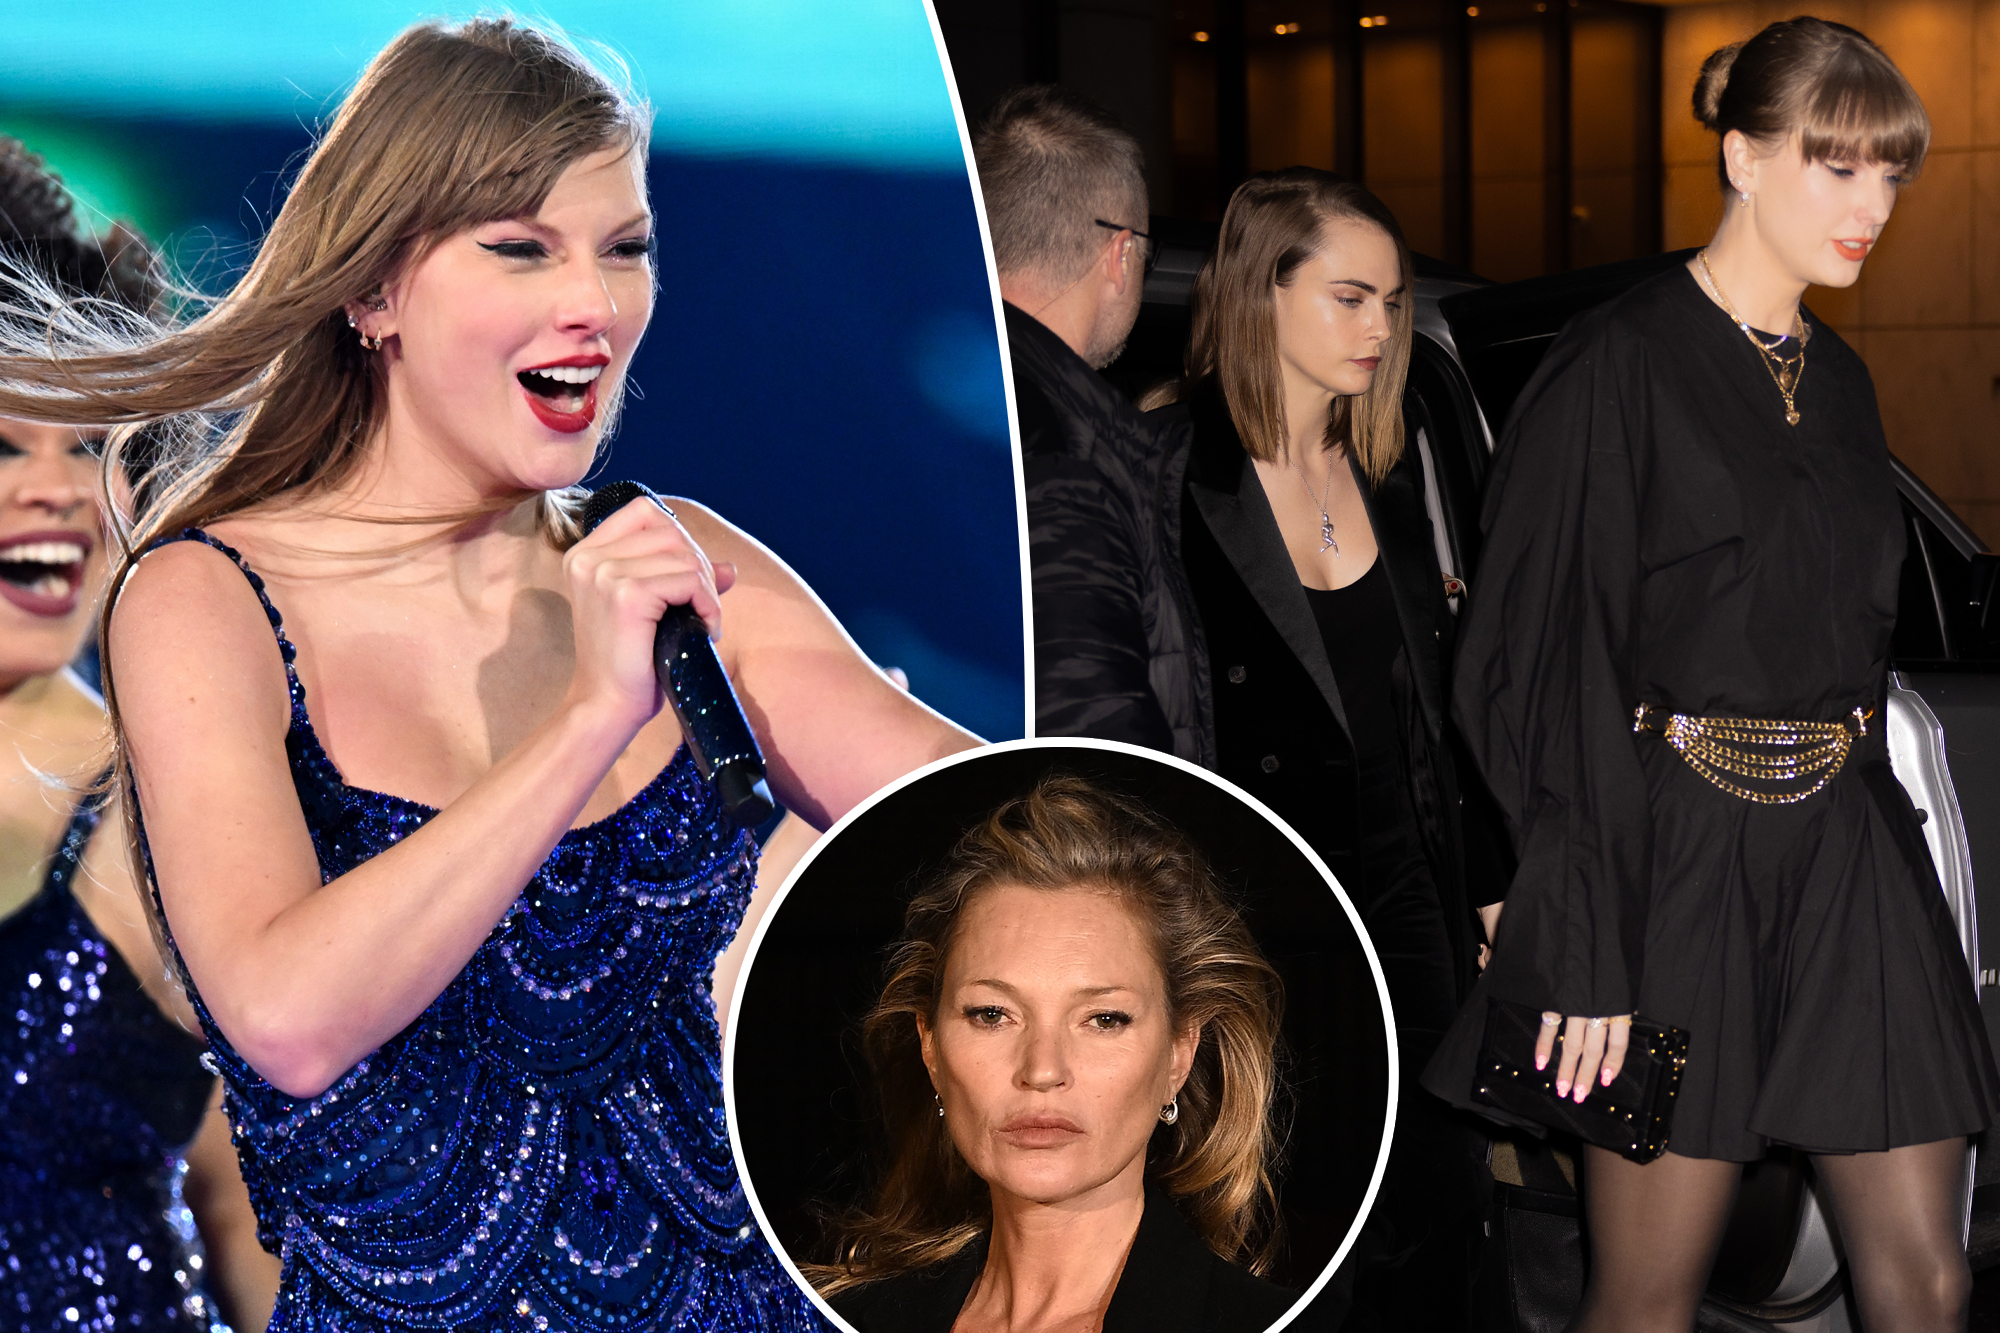 Taylor Swift's Glamorous Night Out in London with A-List Squad Members